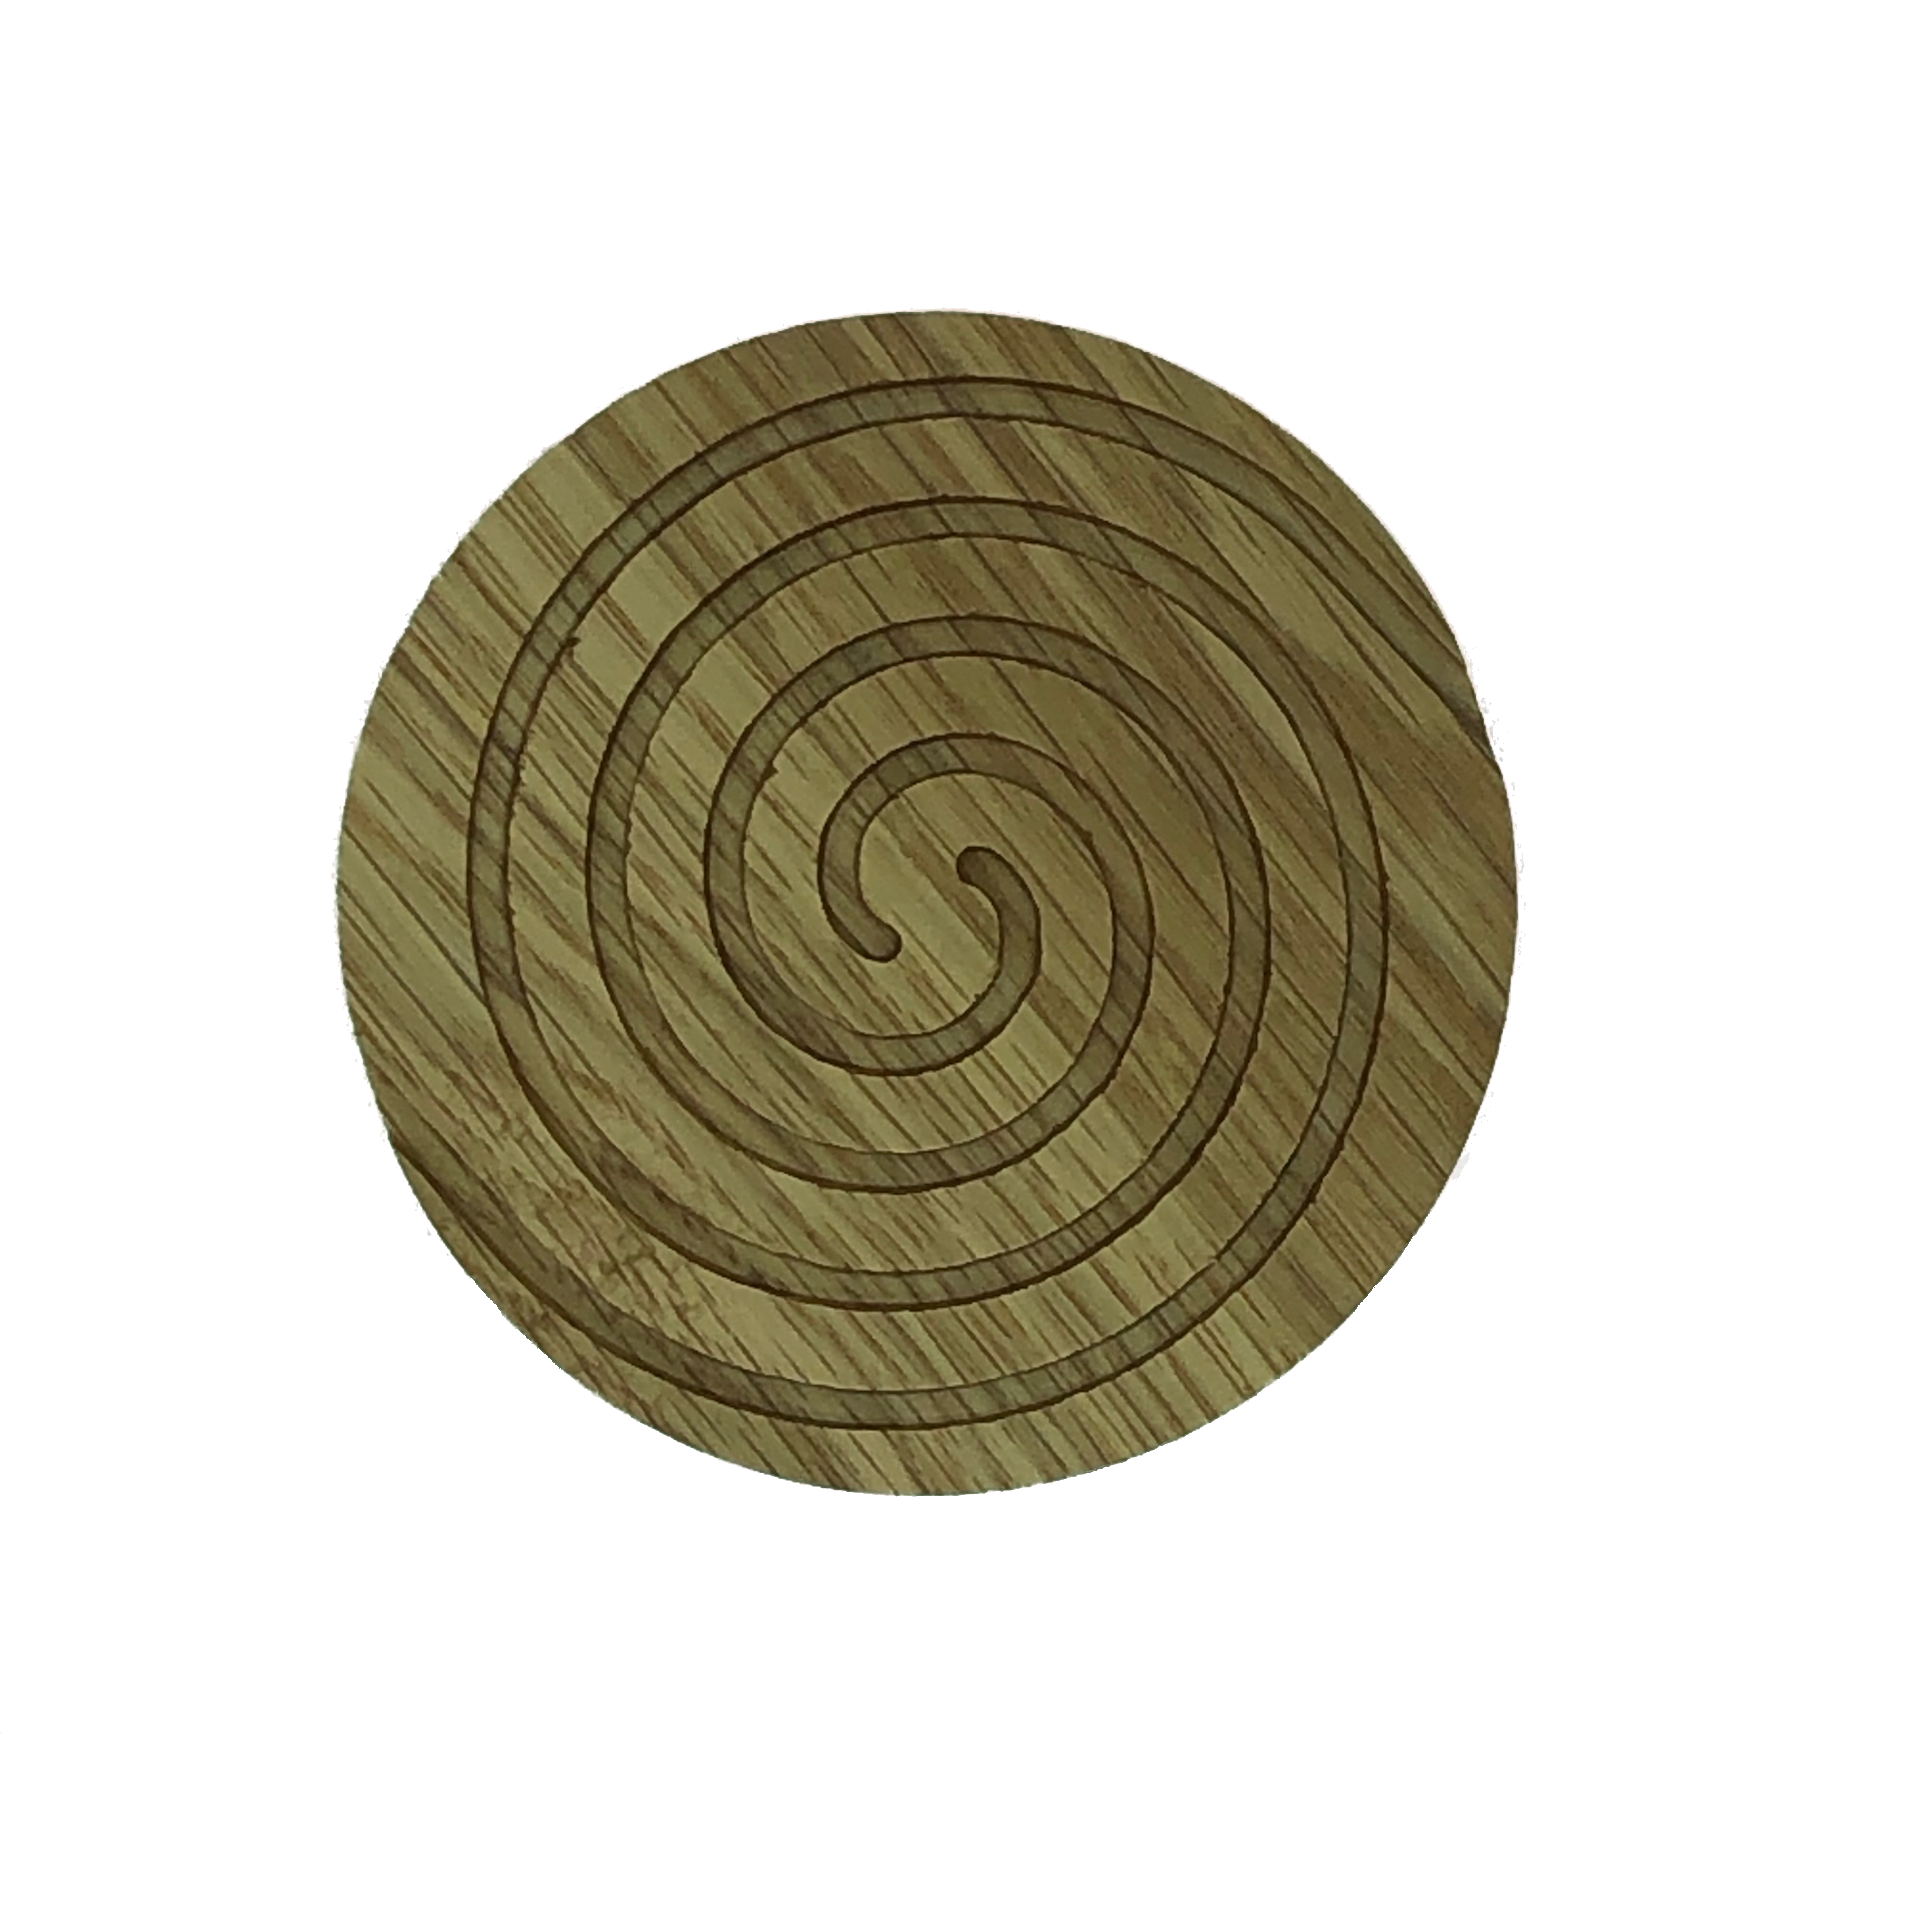 Solid oak round wooden coasters - spiral cut into the top